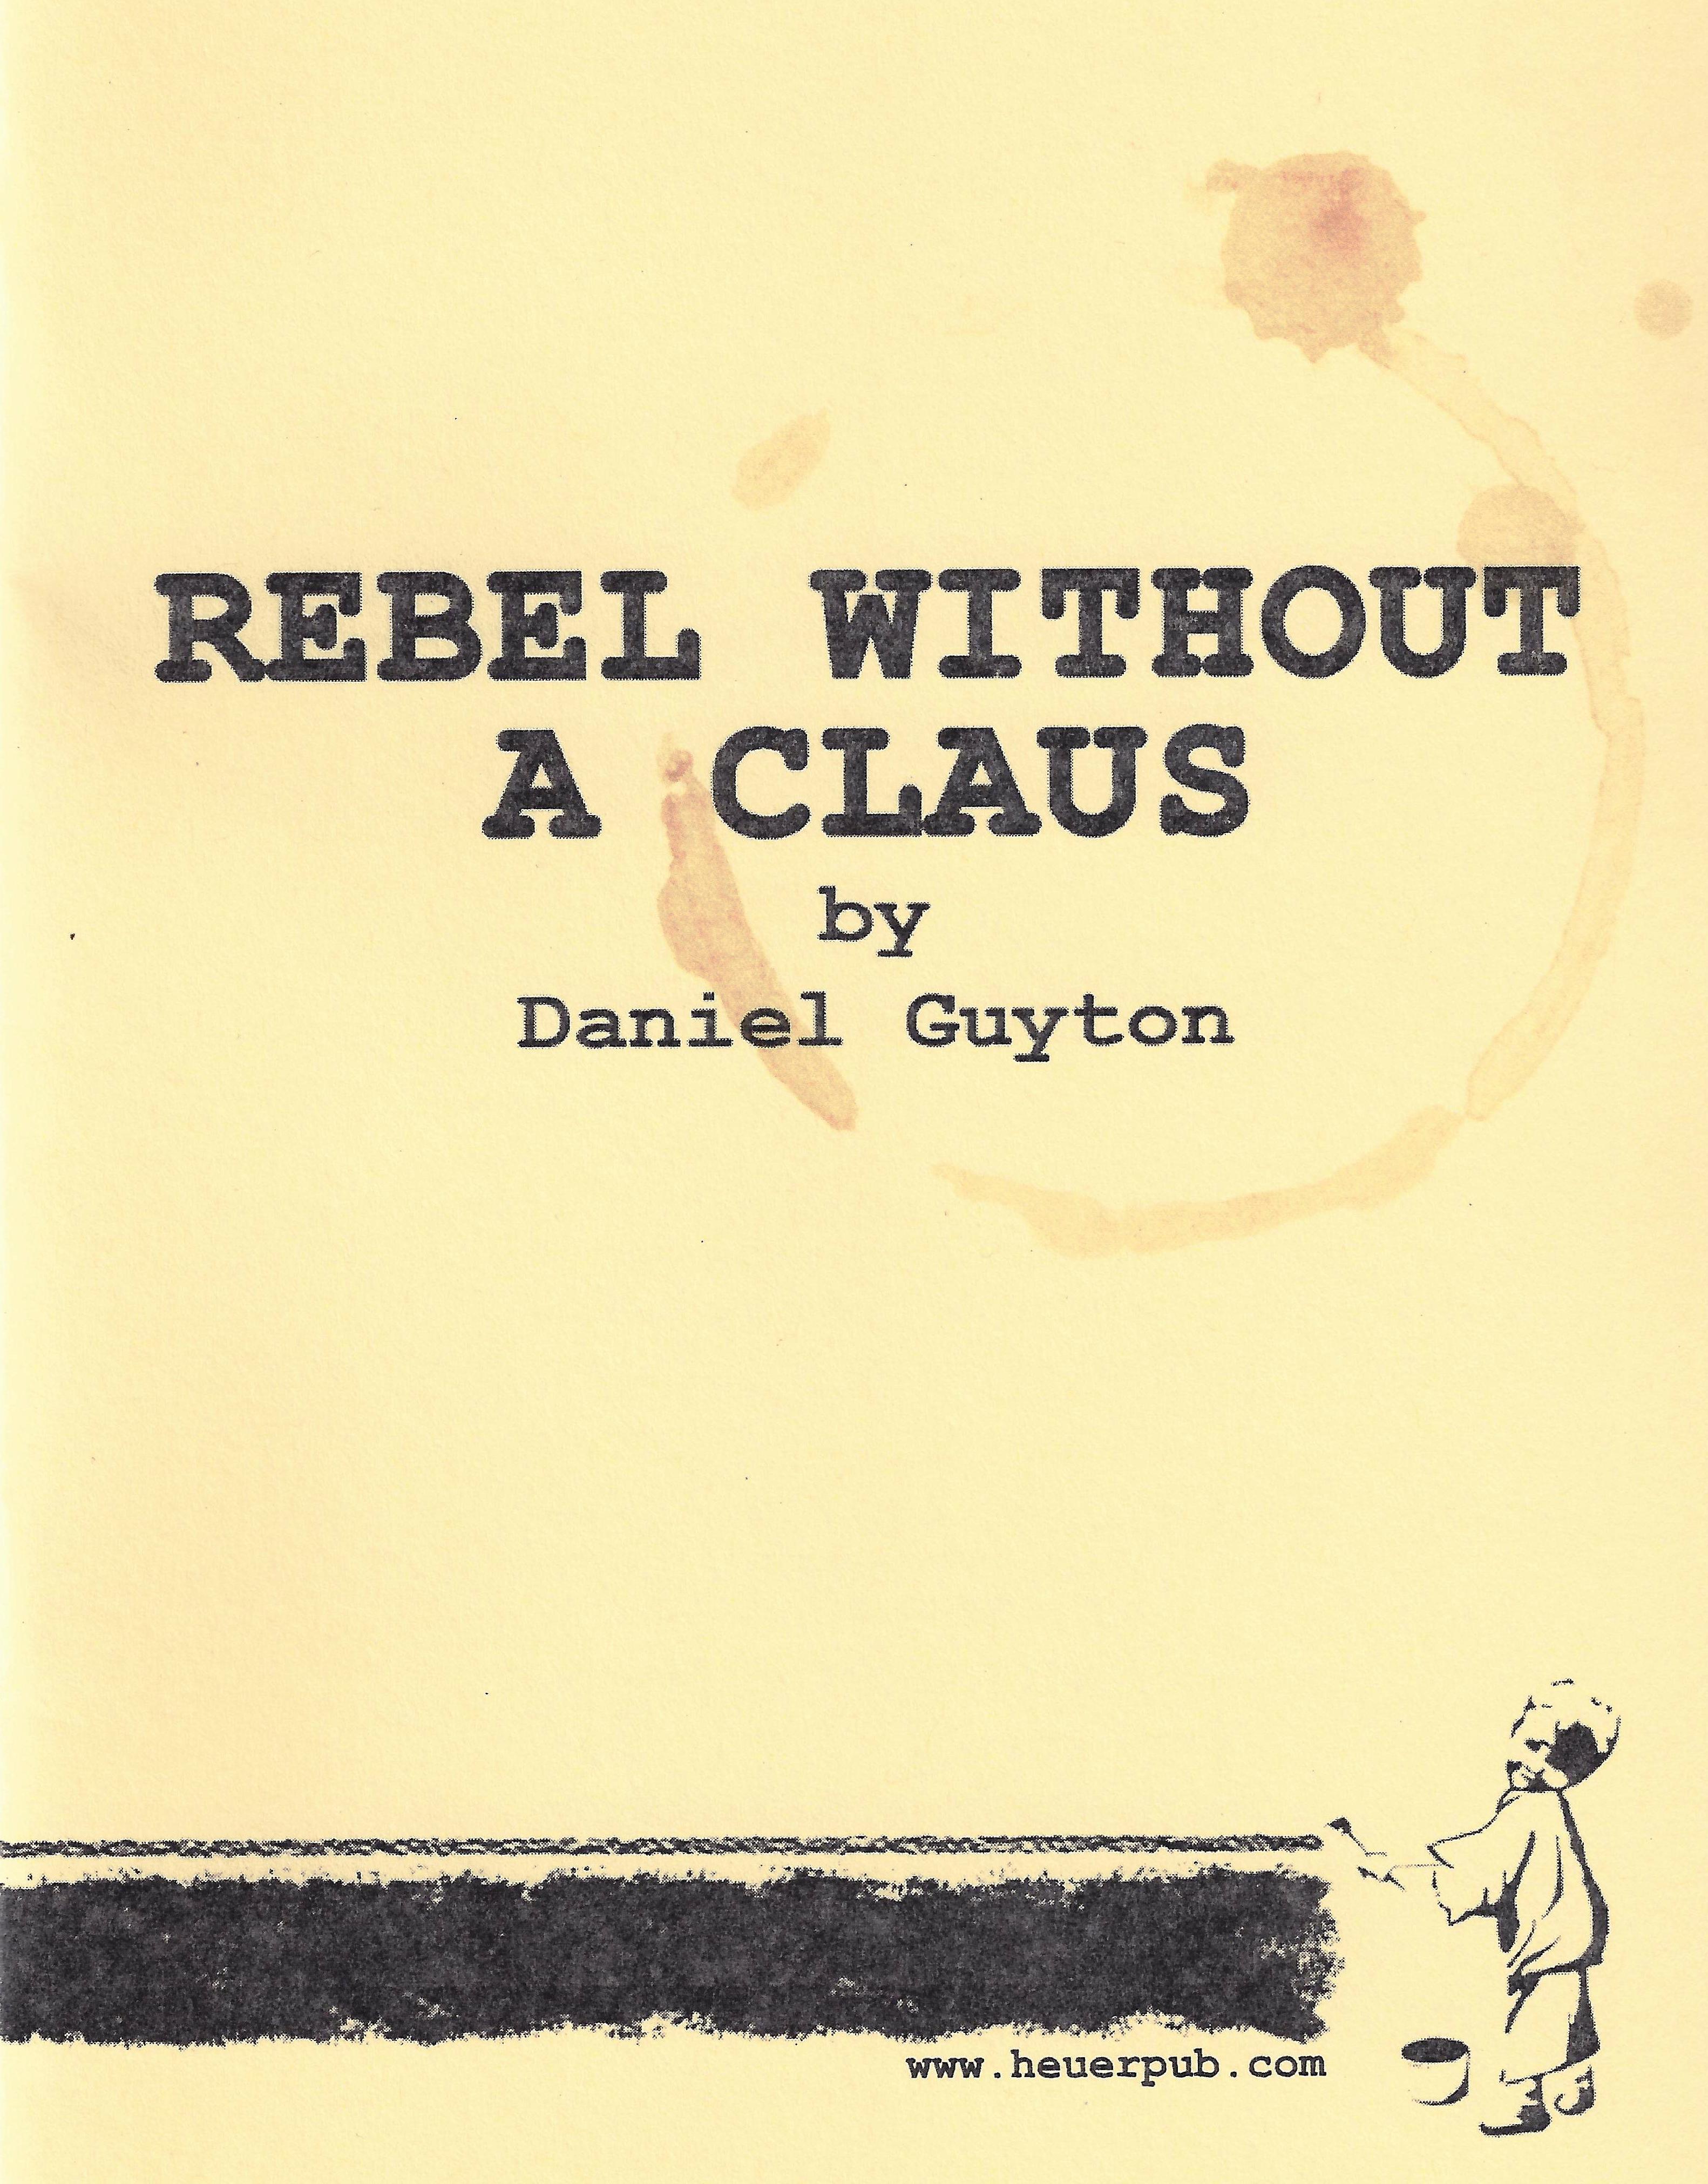 Rebel Without a Claus by Daniel Guyton